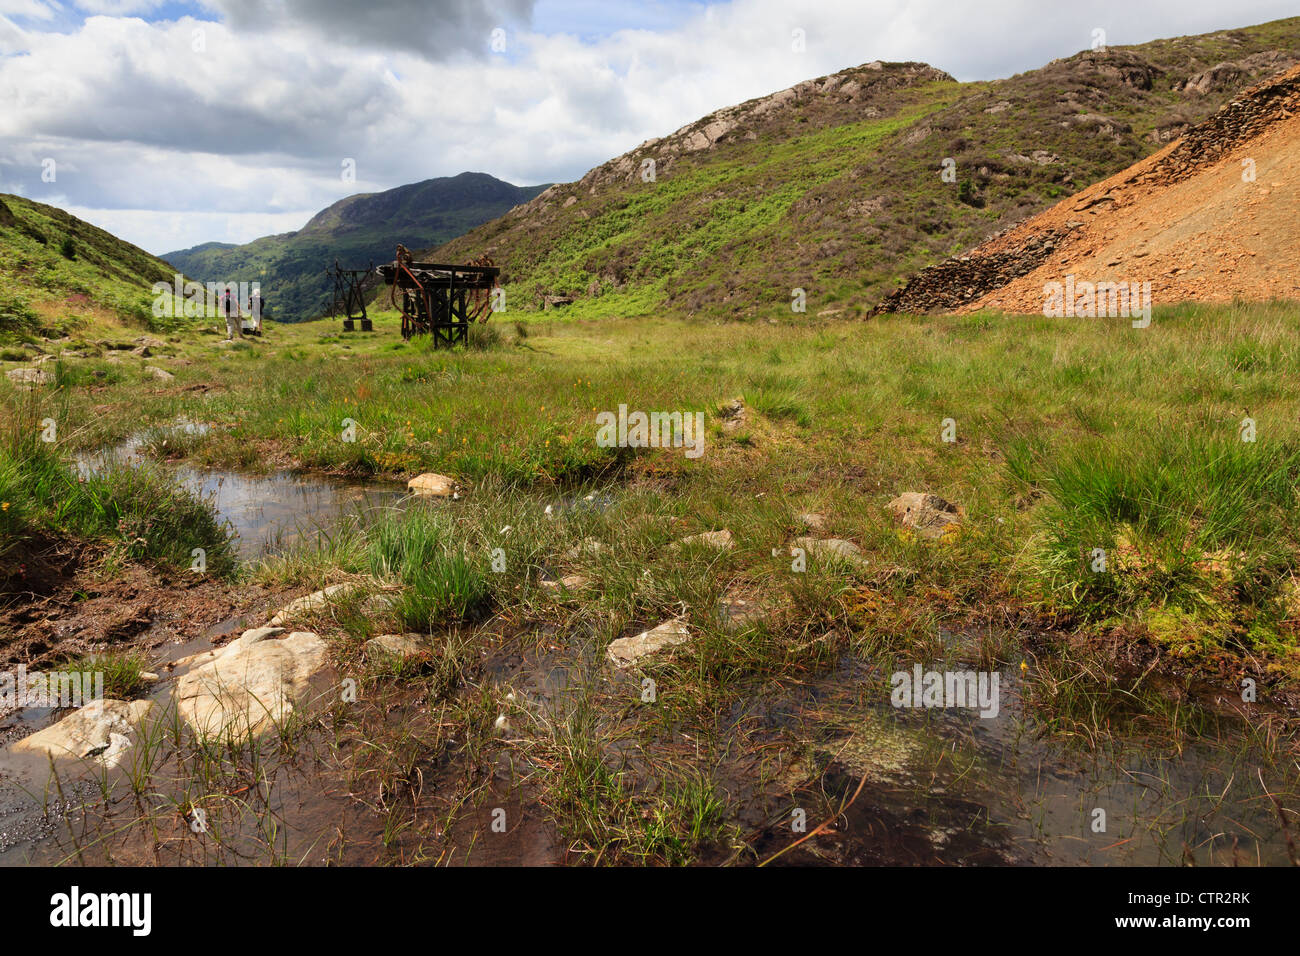 Old copper mine workings and slag in Cwm Bychan valley in Snowdonia National Park near Beddgelert, Gwynedd, North Wales, UK Stock Photo